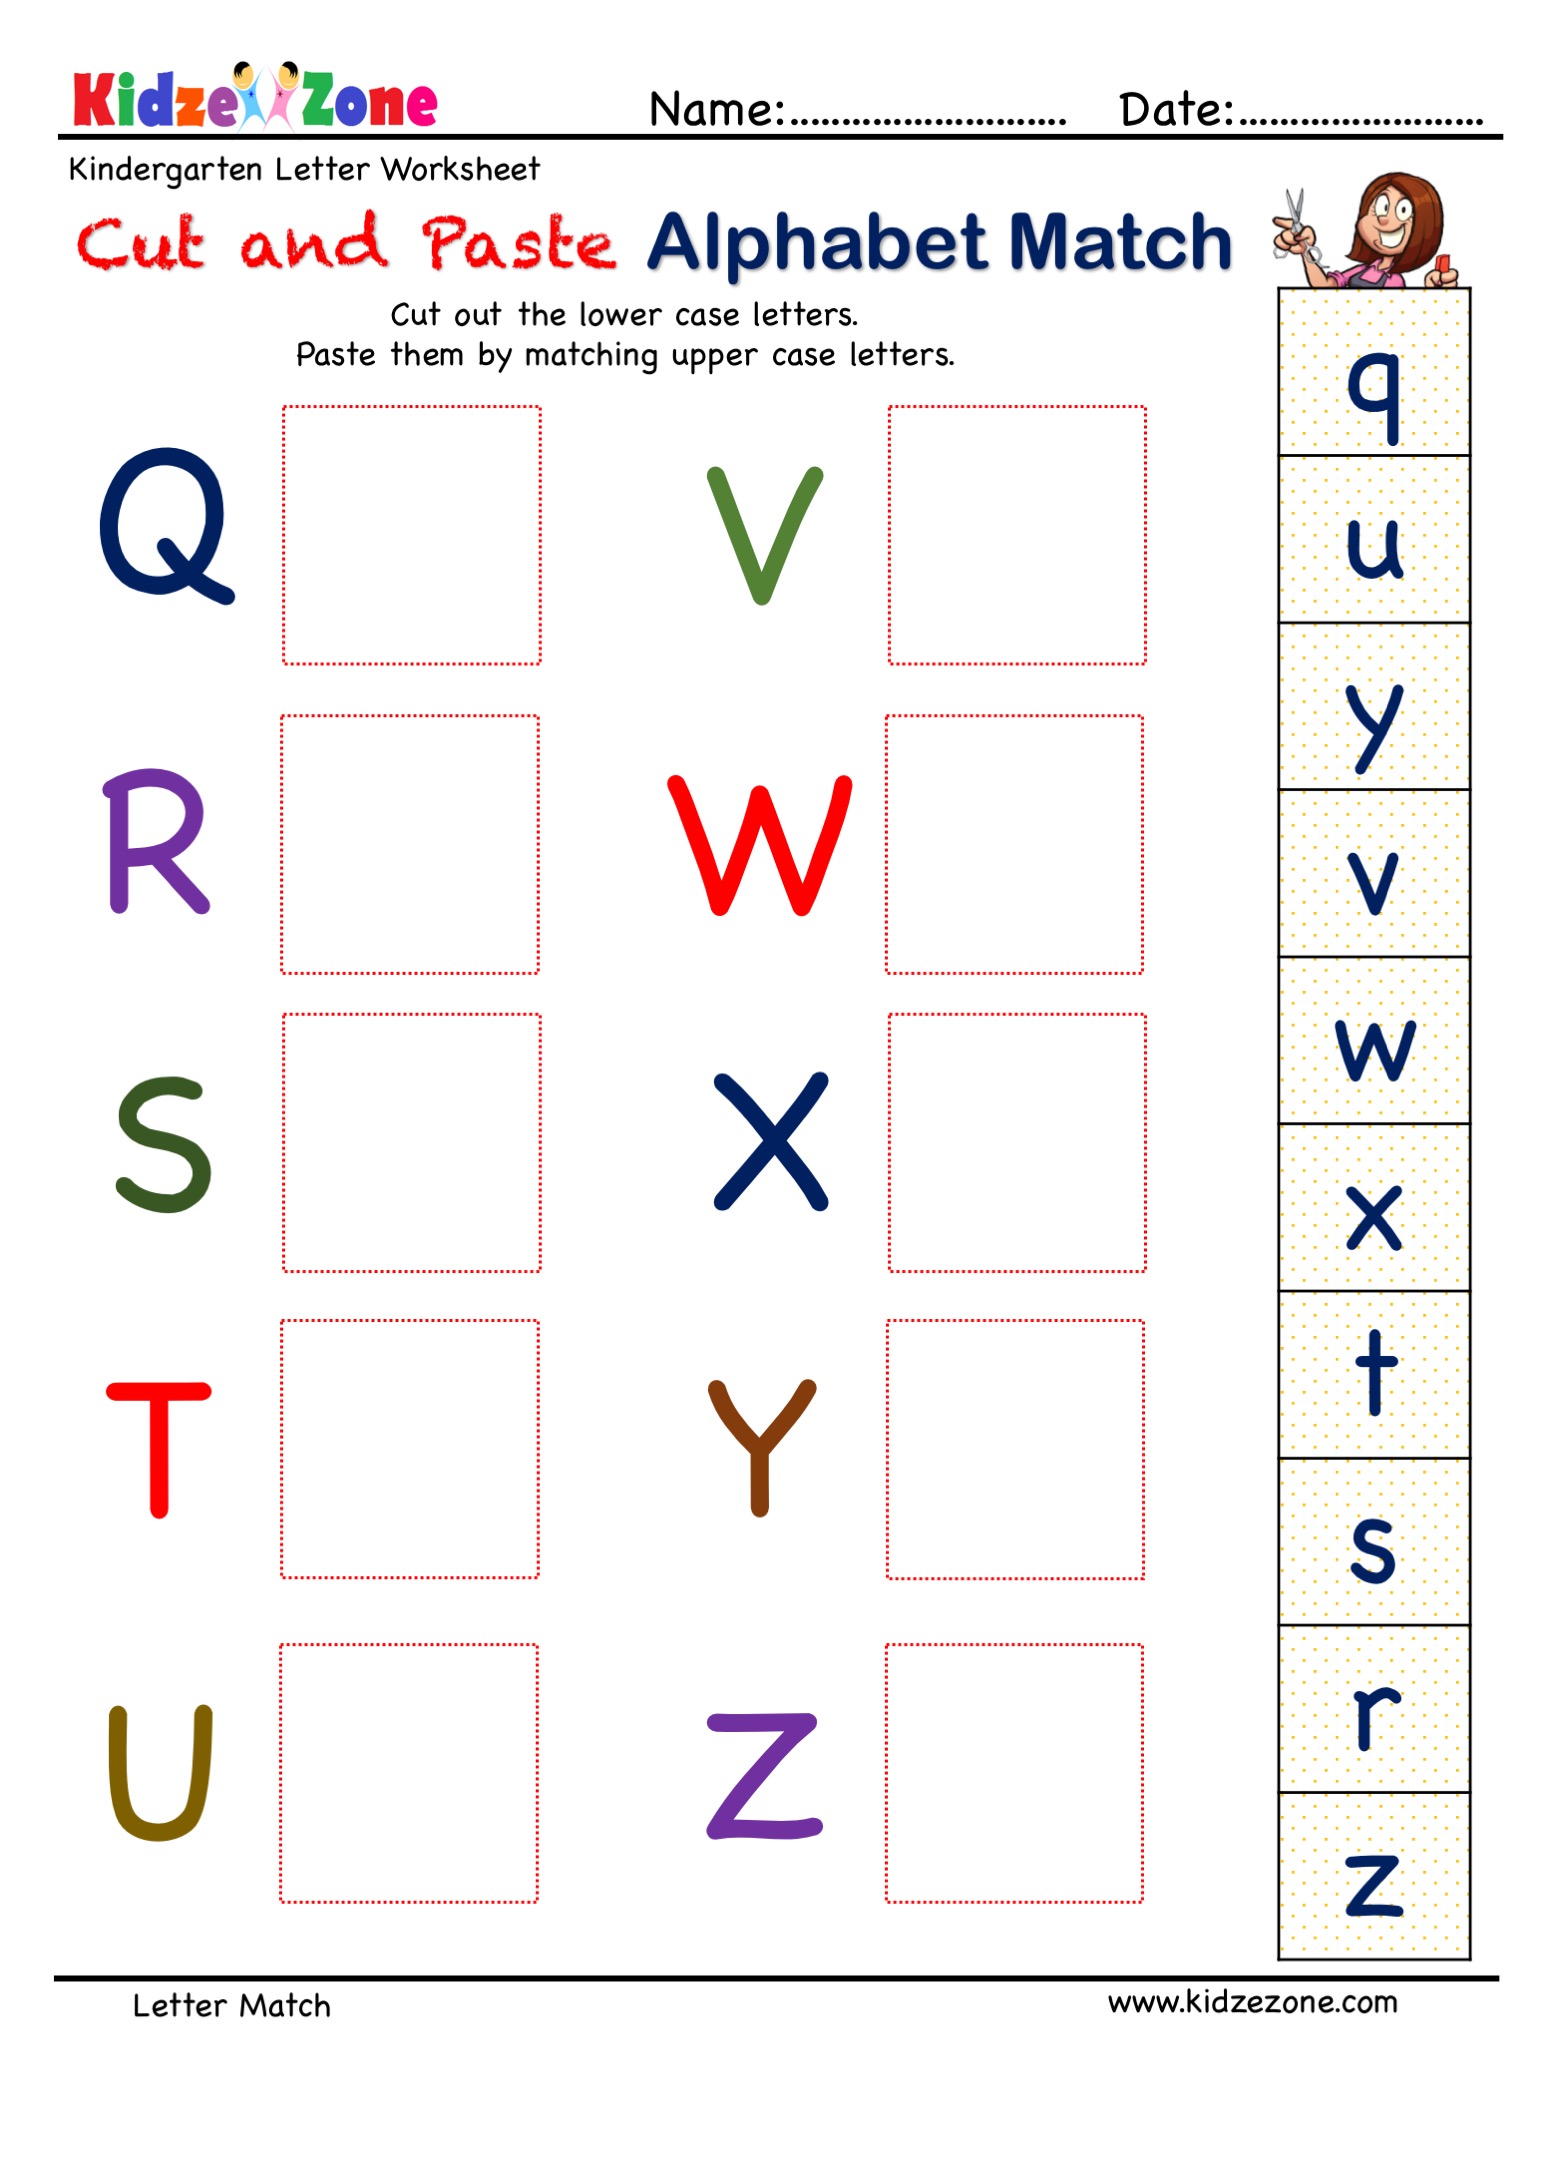 a-z-alphabet-letter-tracing-worksheet-alphabets-capital-letters-tracing-traceable-alphabet